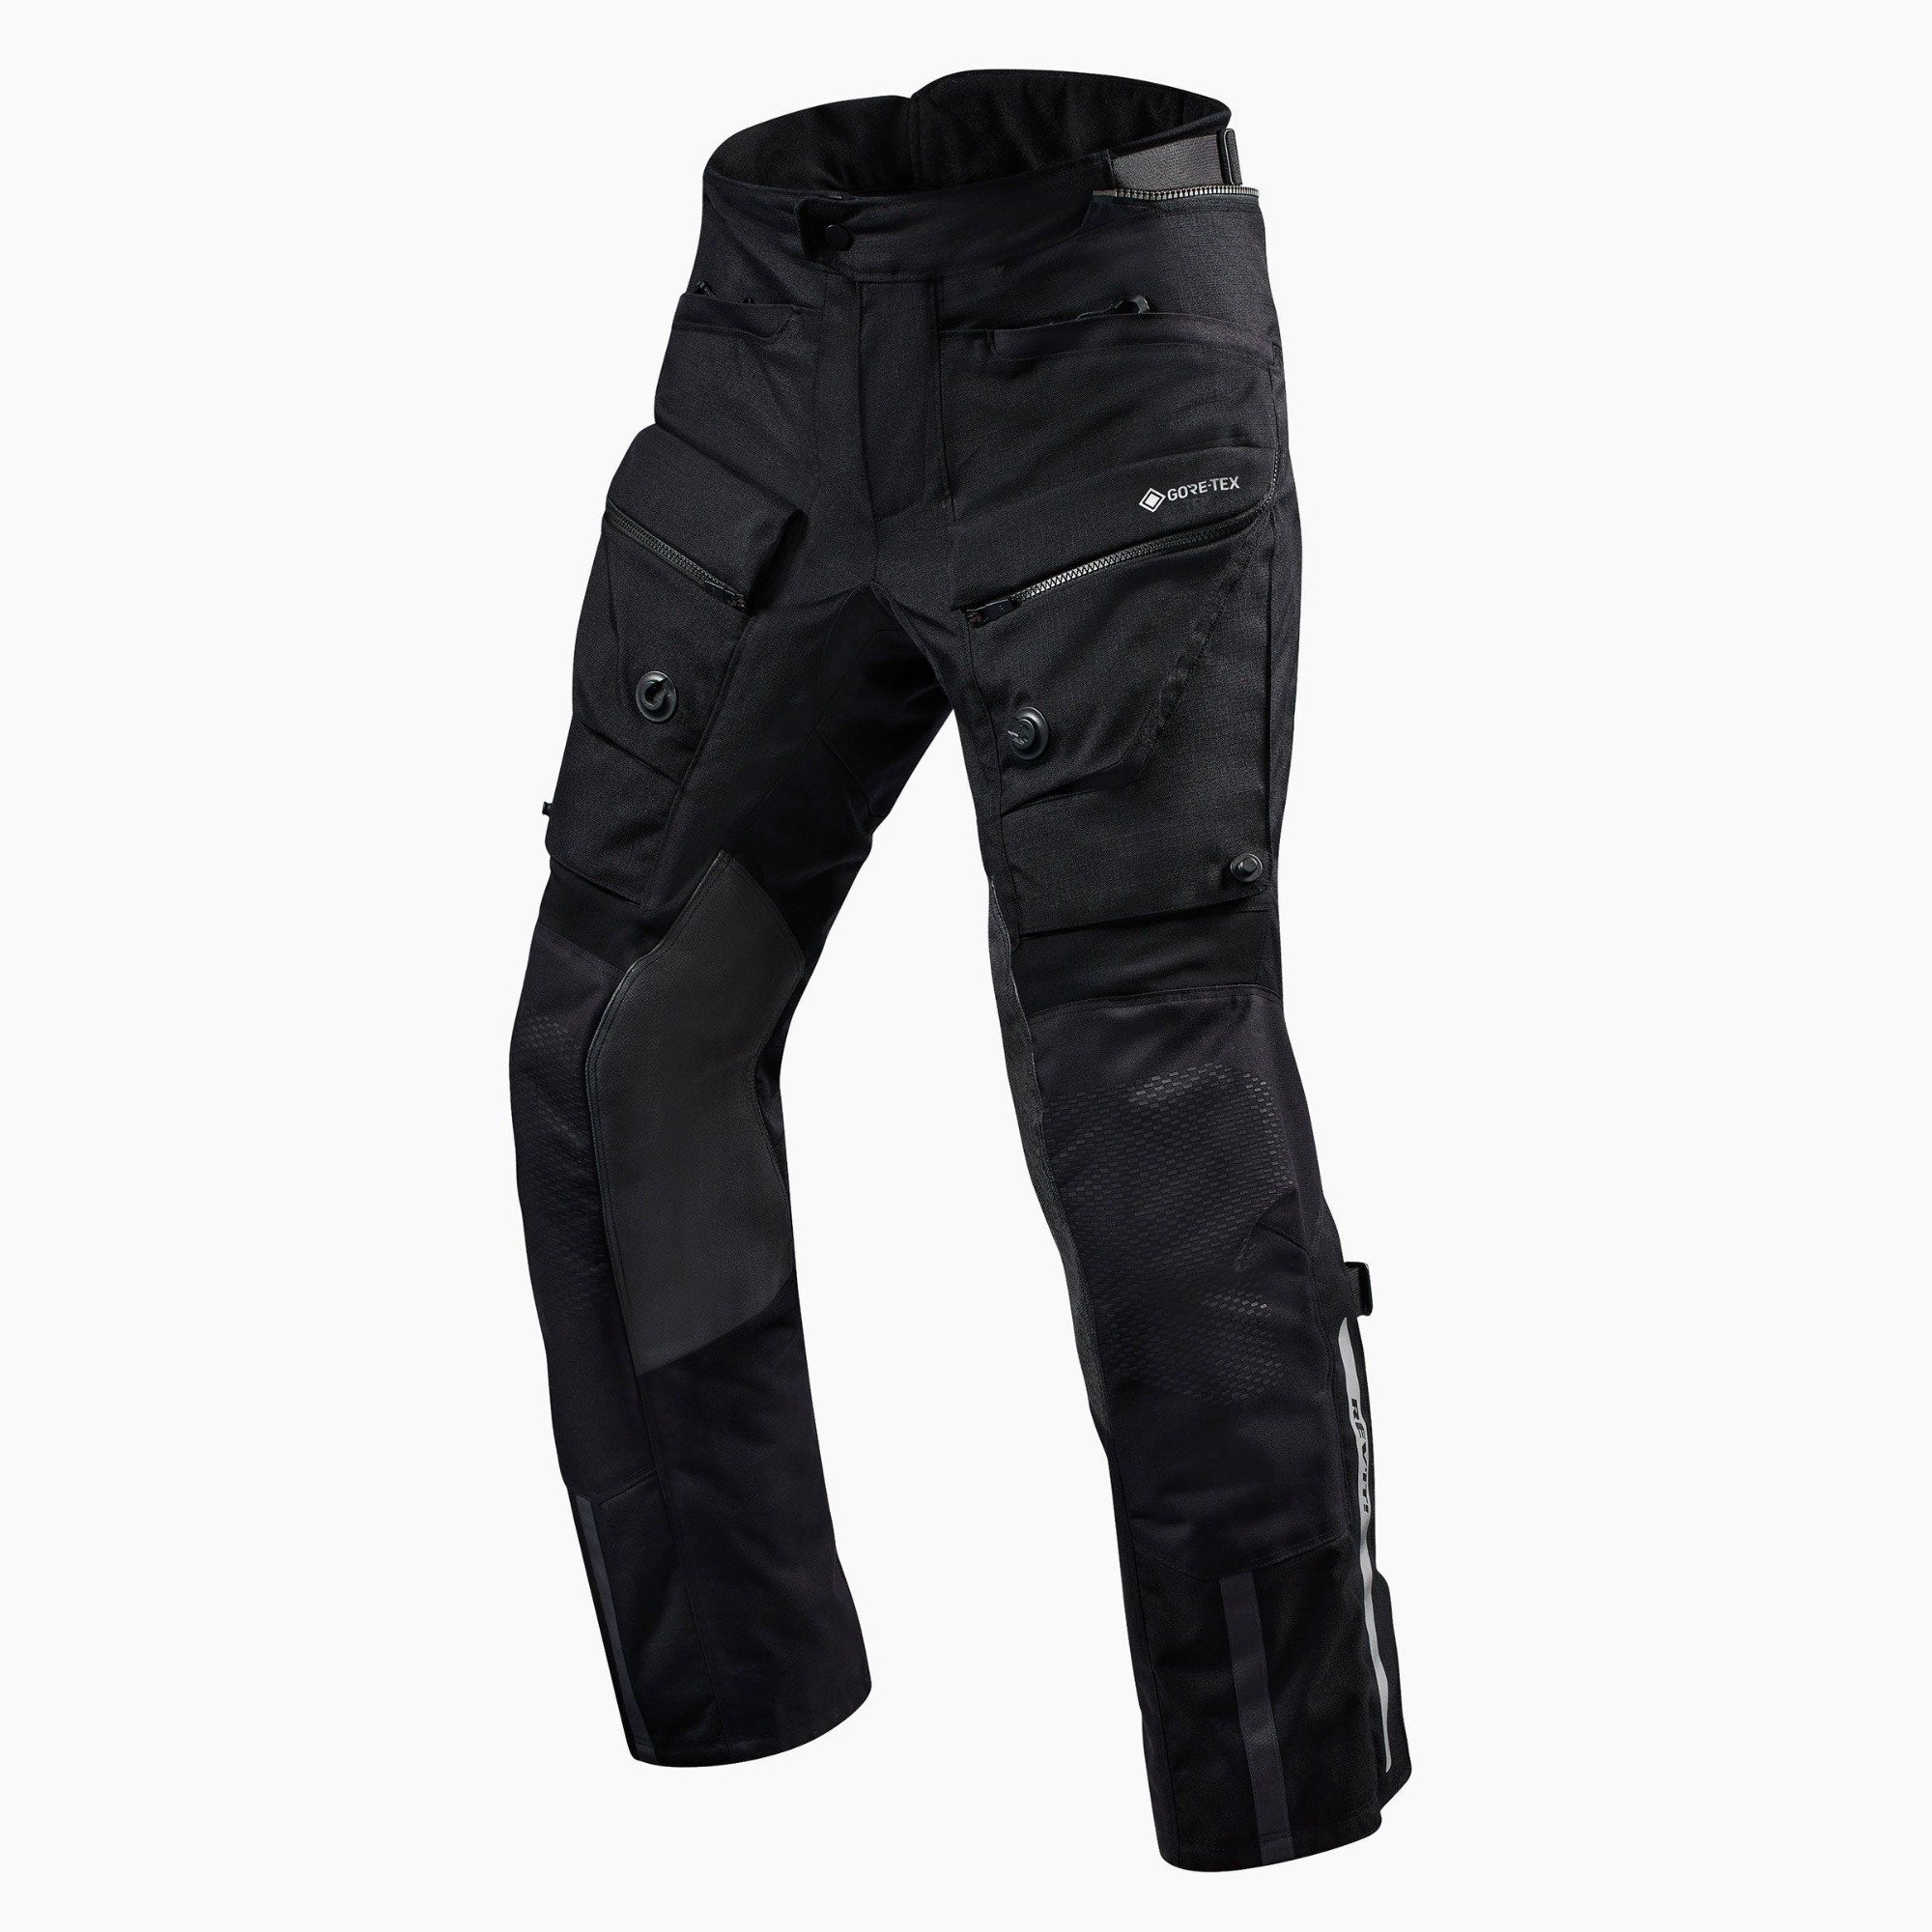 Image of REV'IT! Trousers Defender 3 GTX Black Short Motorcycle Pants Size M ID 8700001319850